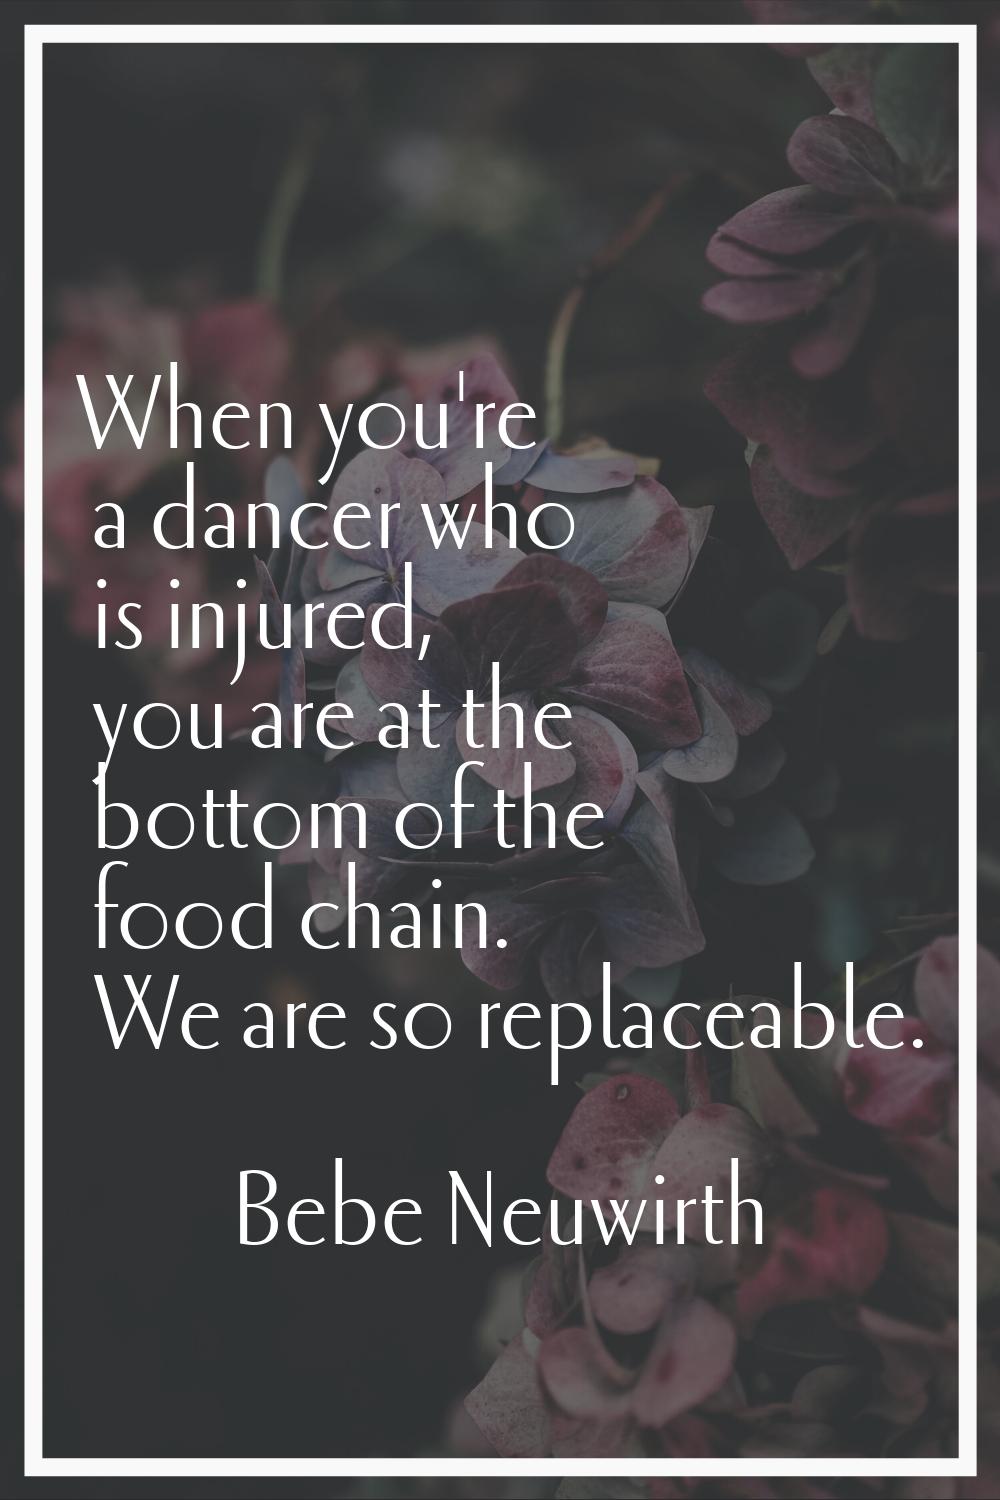 When you're a dancer who is injured, you are at the bottom of the food chain. We are so replaceable